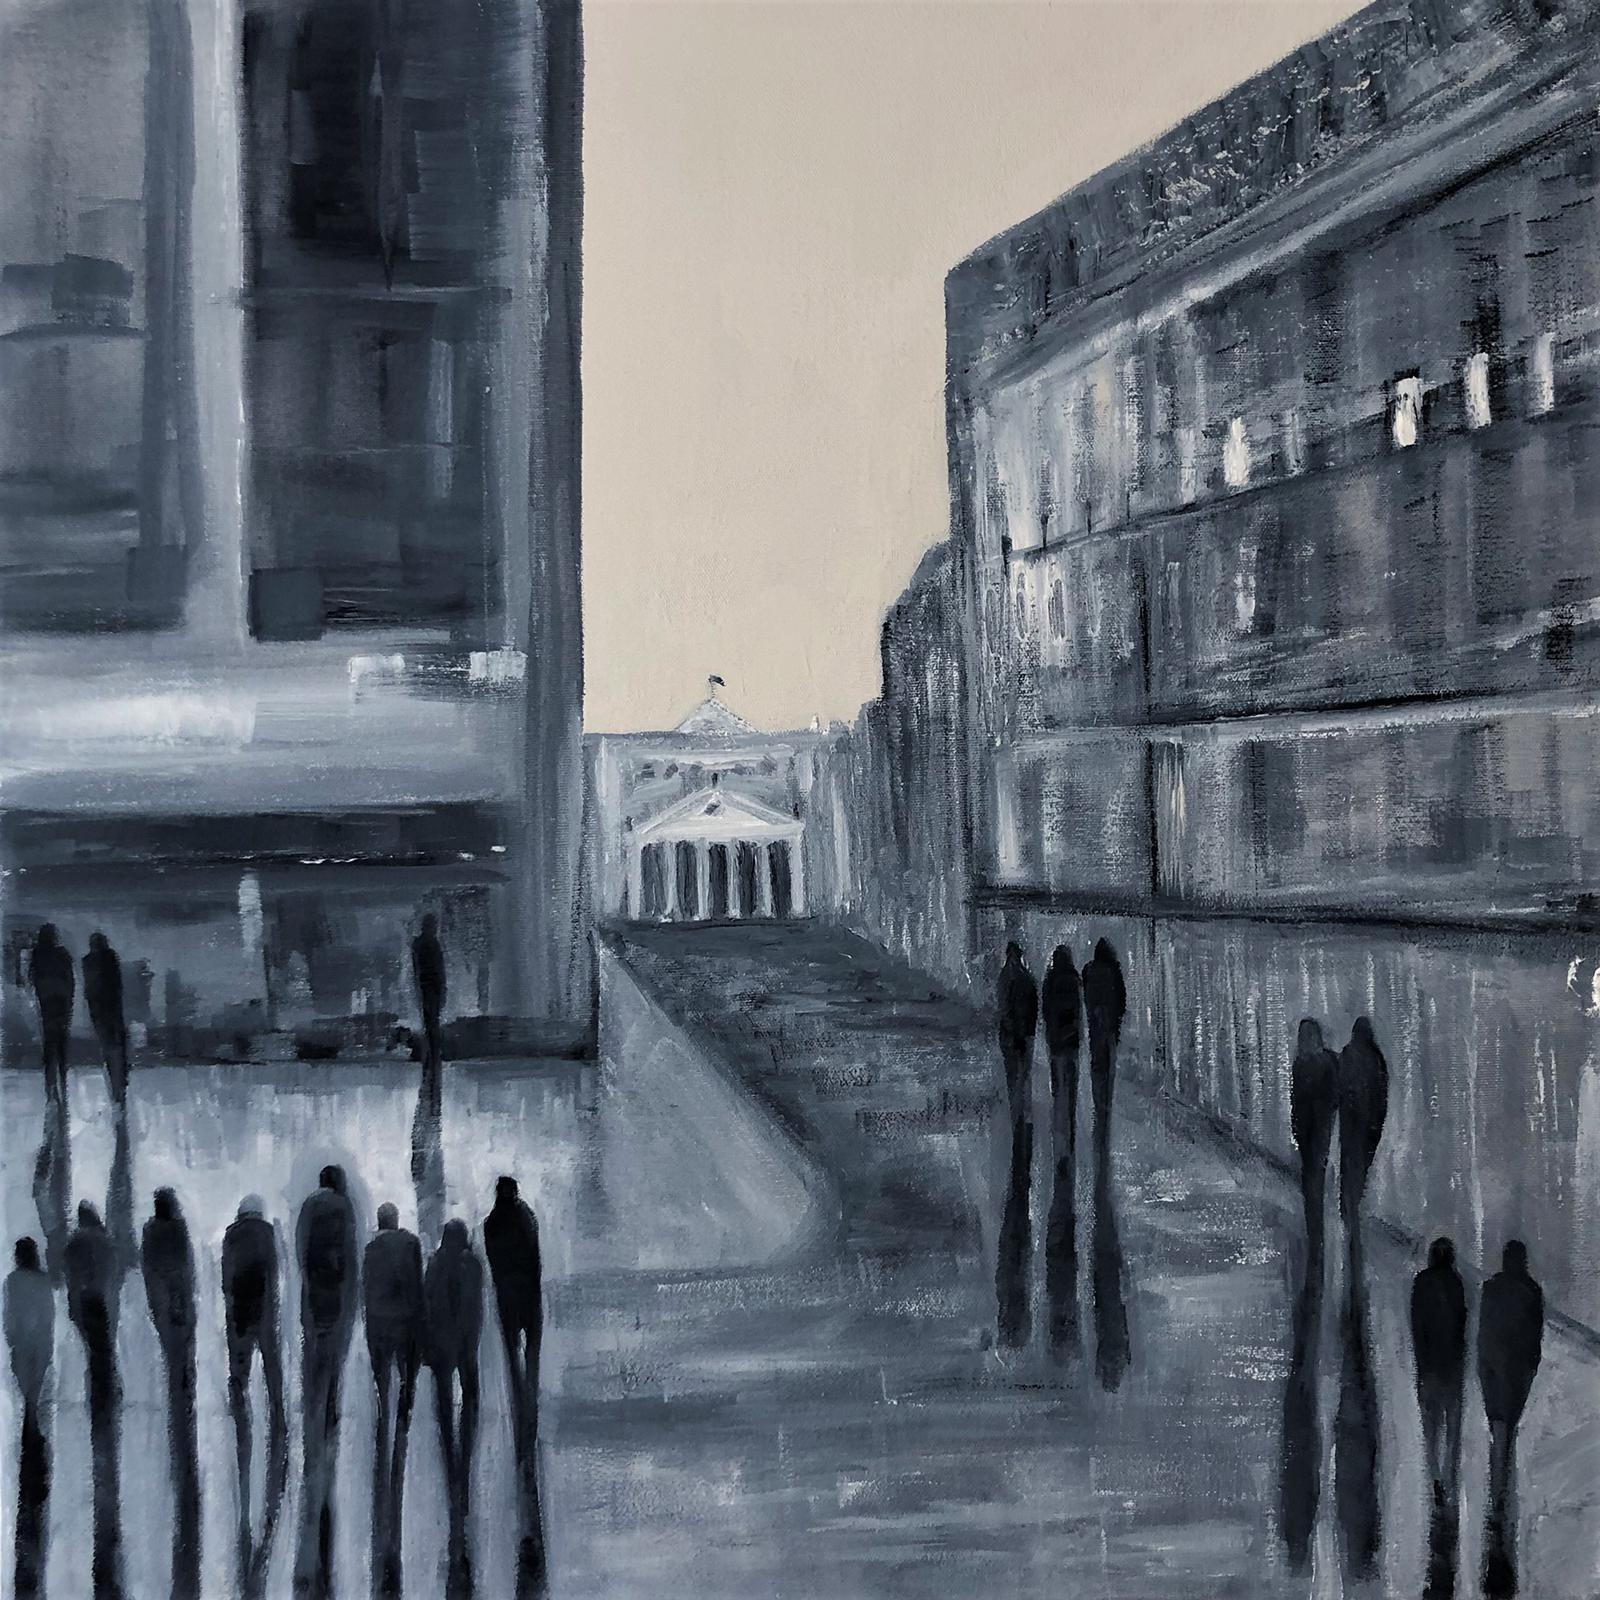 ‘Towards Haymarket’ is a stunning oil on canvas work by award winning artist Jo Holdsworth.
Inspired by the wonderful architecture of the Theatre Royal Haymarket, the painting includes the reflected figures for which Jo is particularly known and the